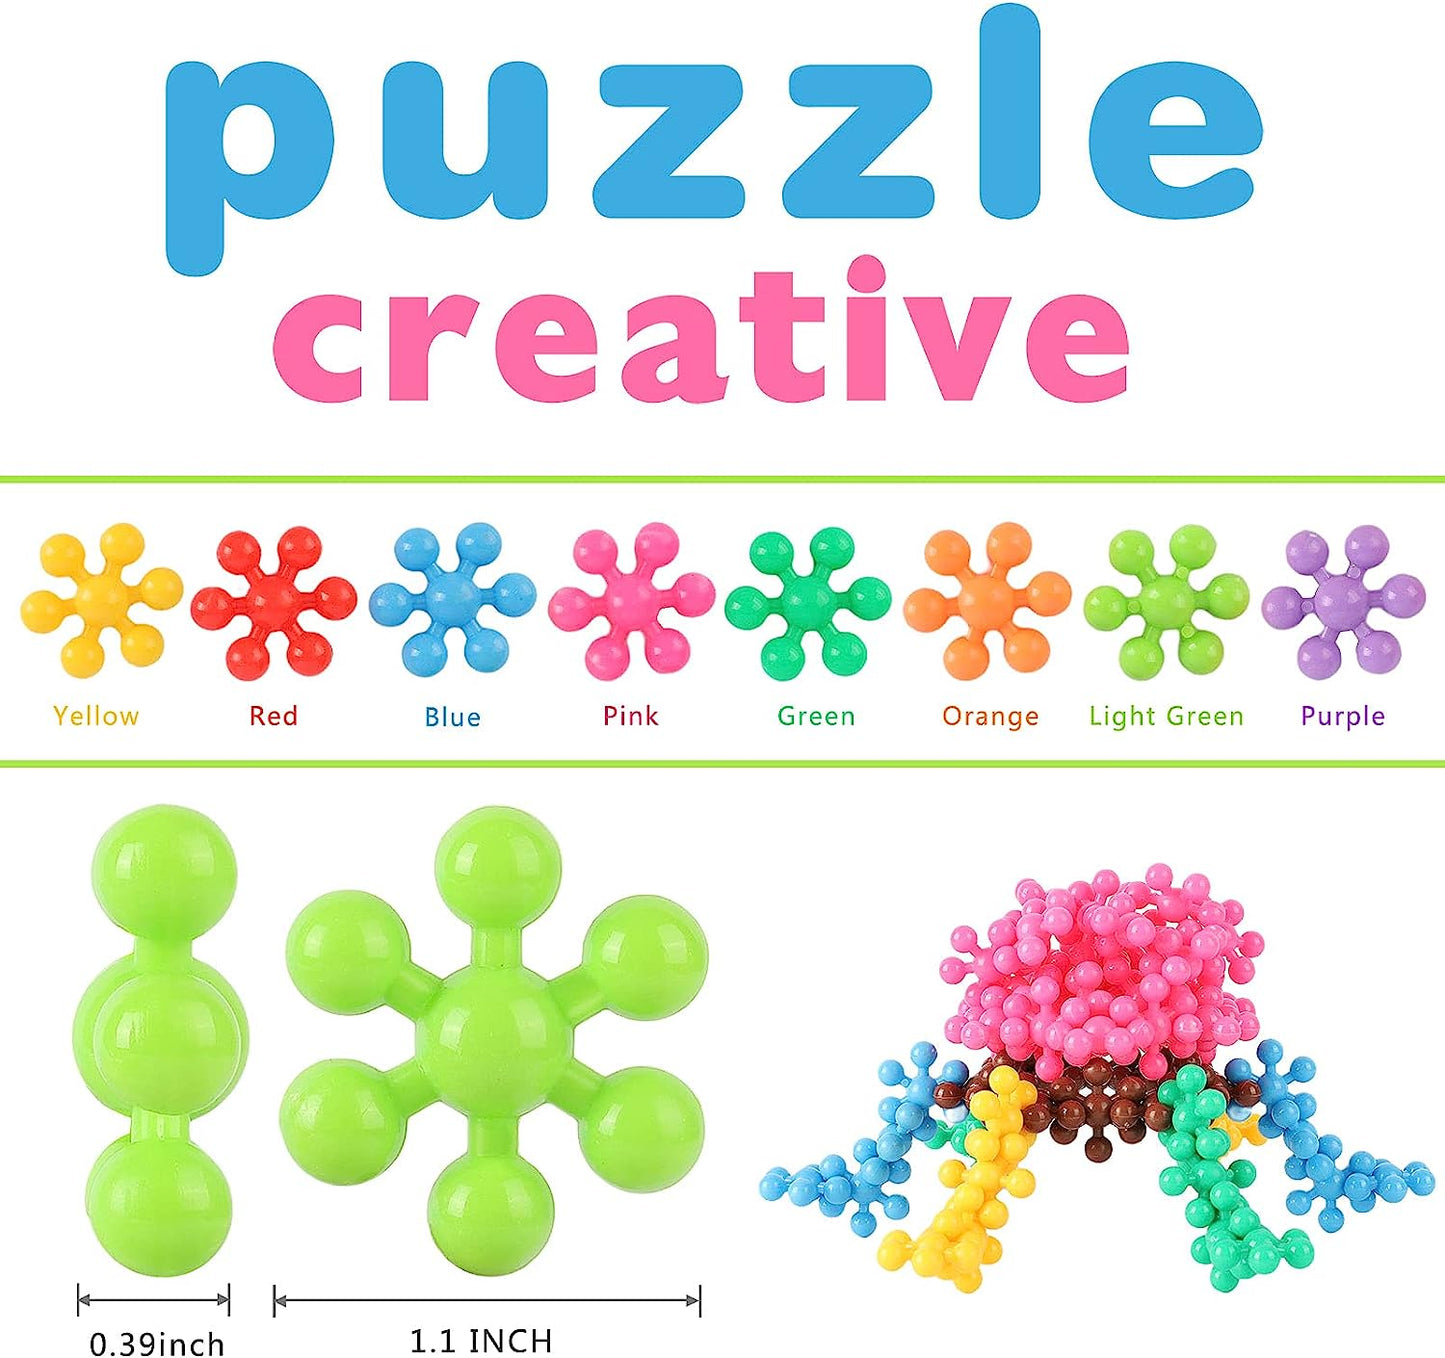 200 Pieces Building Blocks Kids STEM Toys Educational Discs Sets Interlocking Solid Plastic for Preschool Boys and Girls Aged 3+, Safe Material Creativity